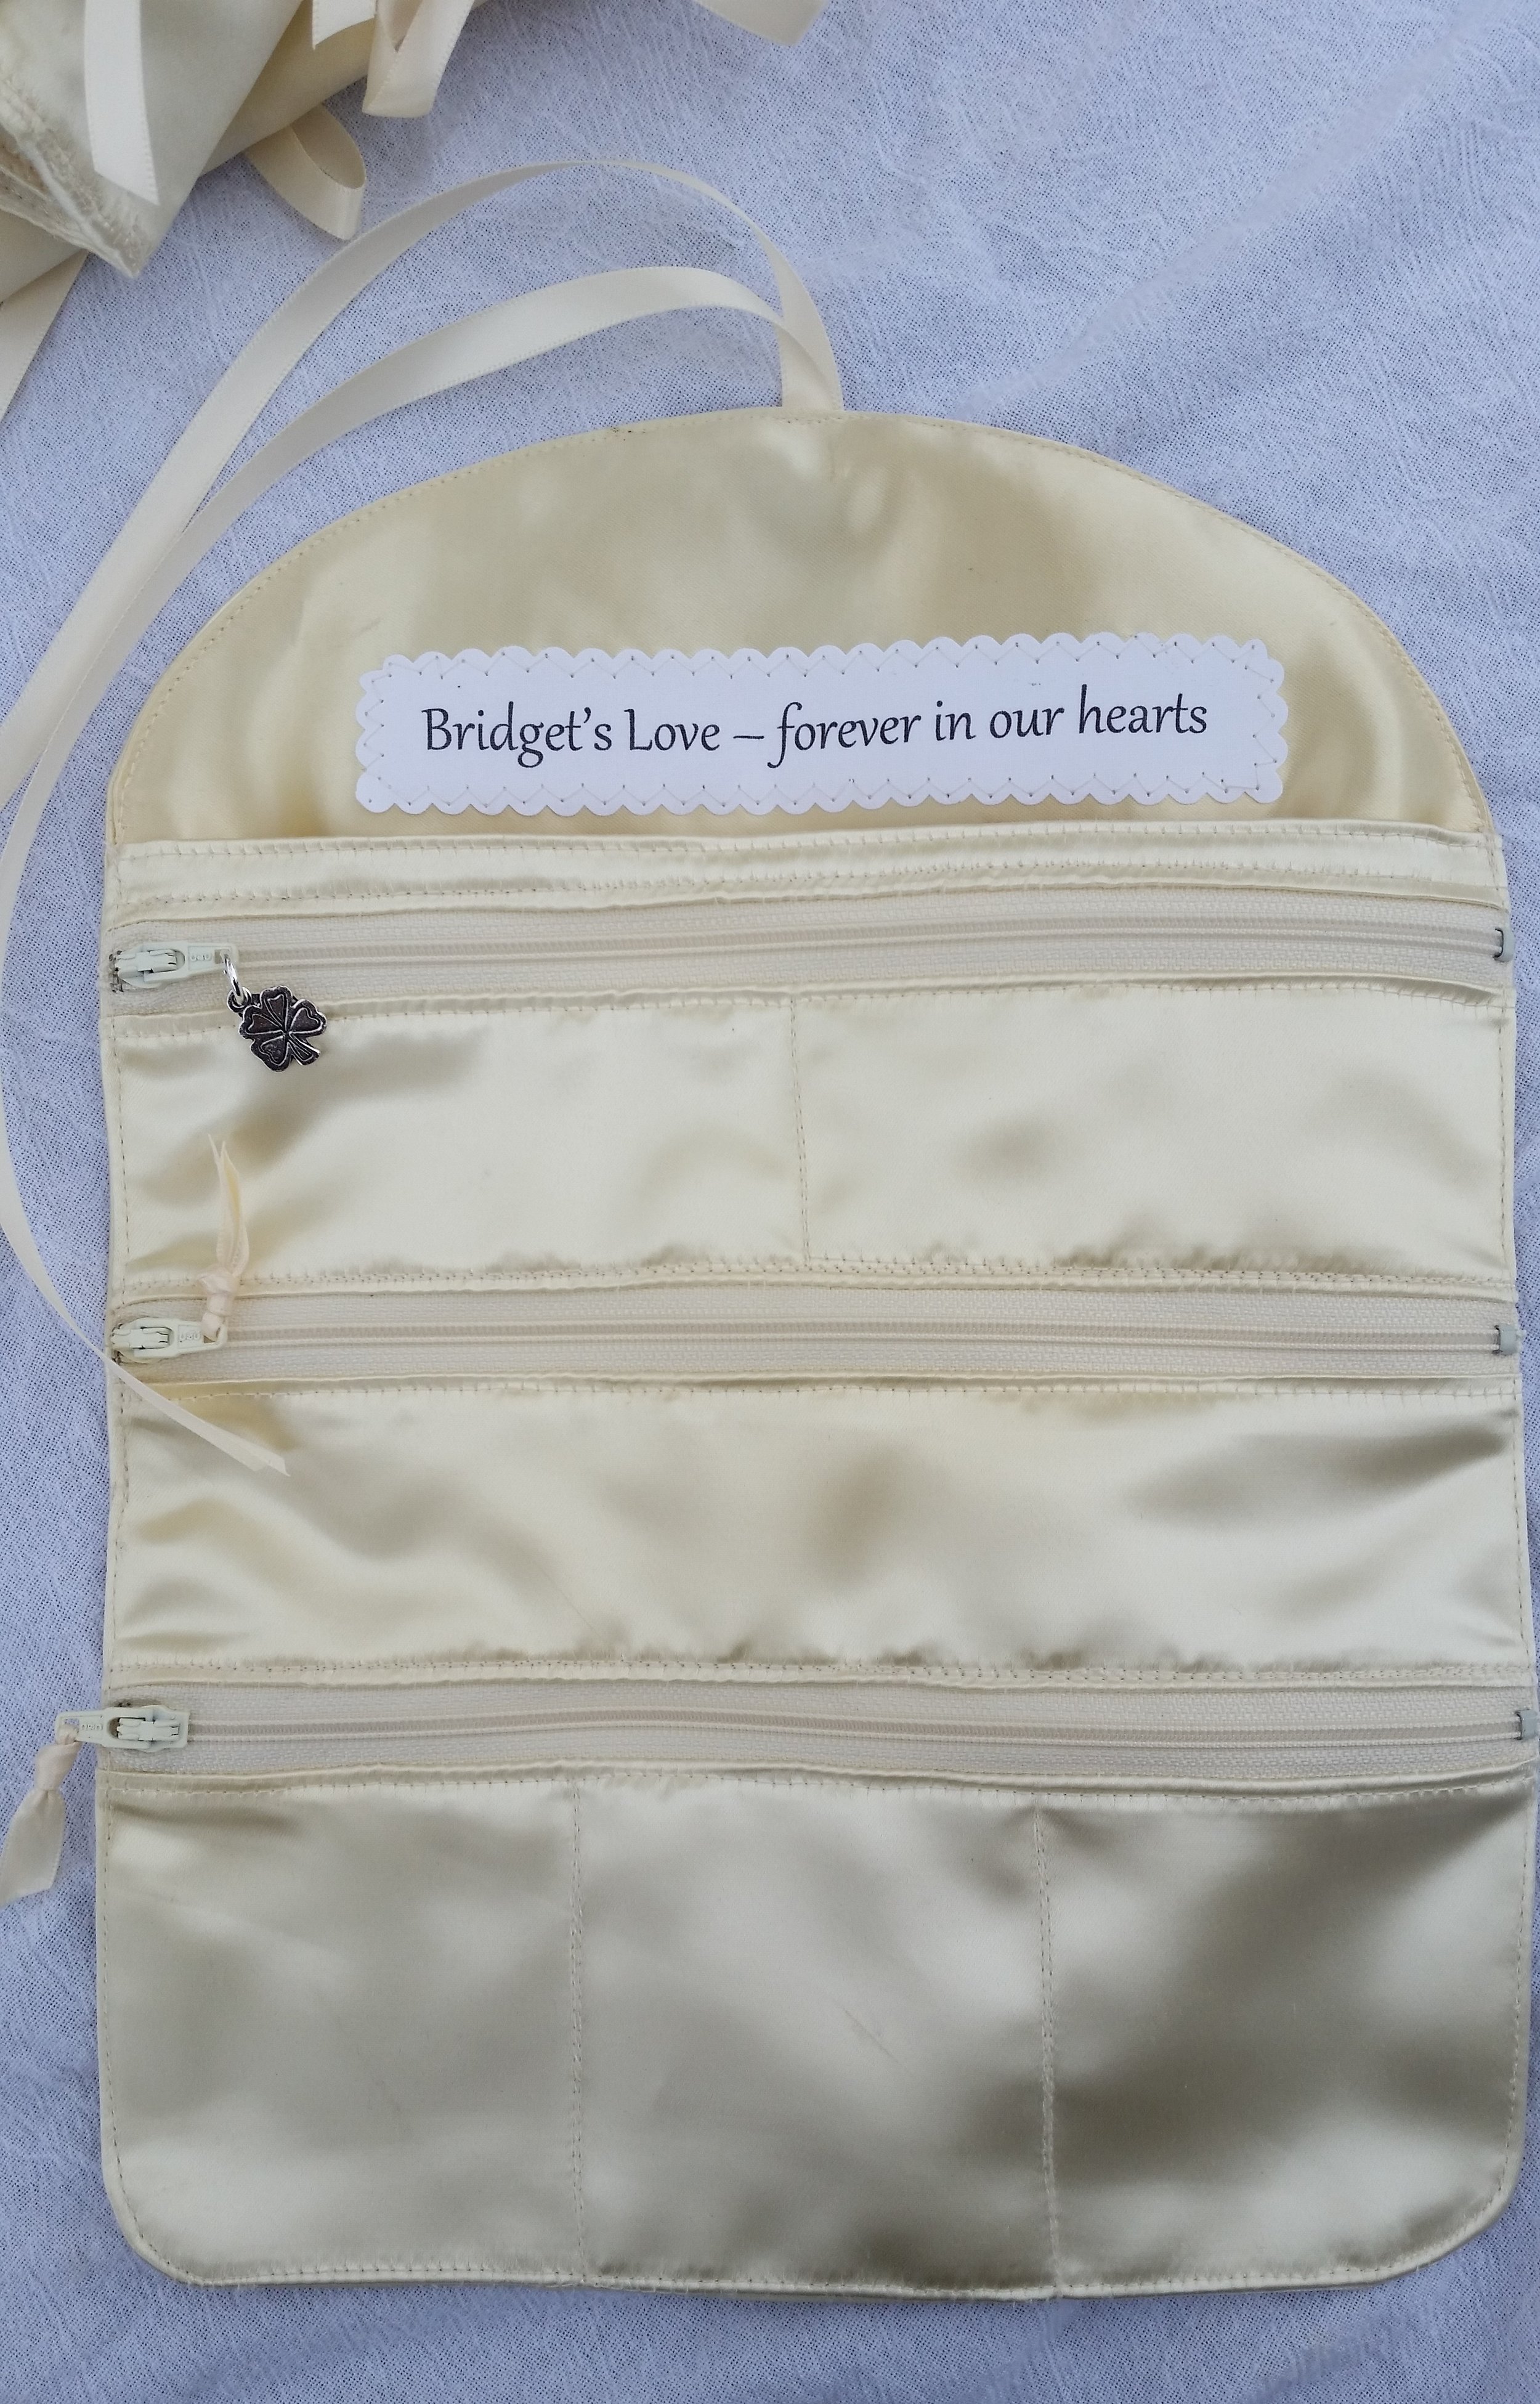  A label with a lovely sentiment will always remind the recipient of their loved one 